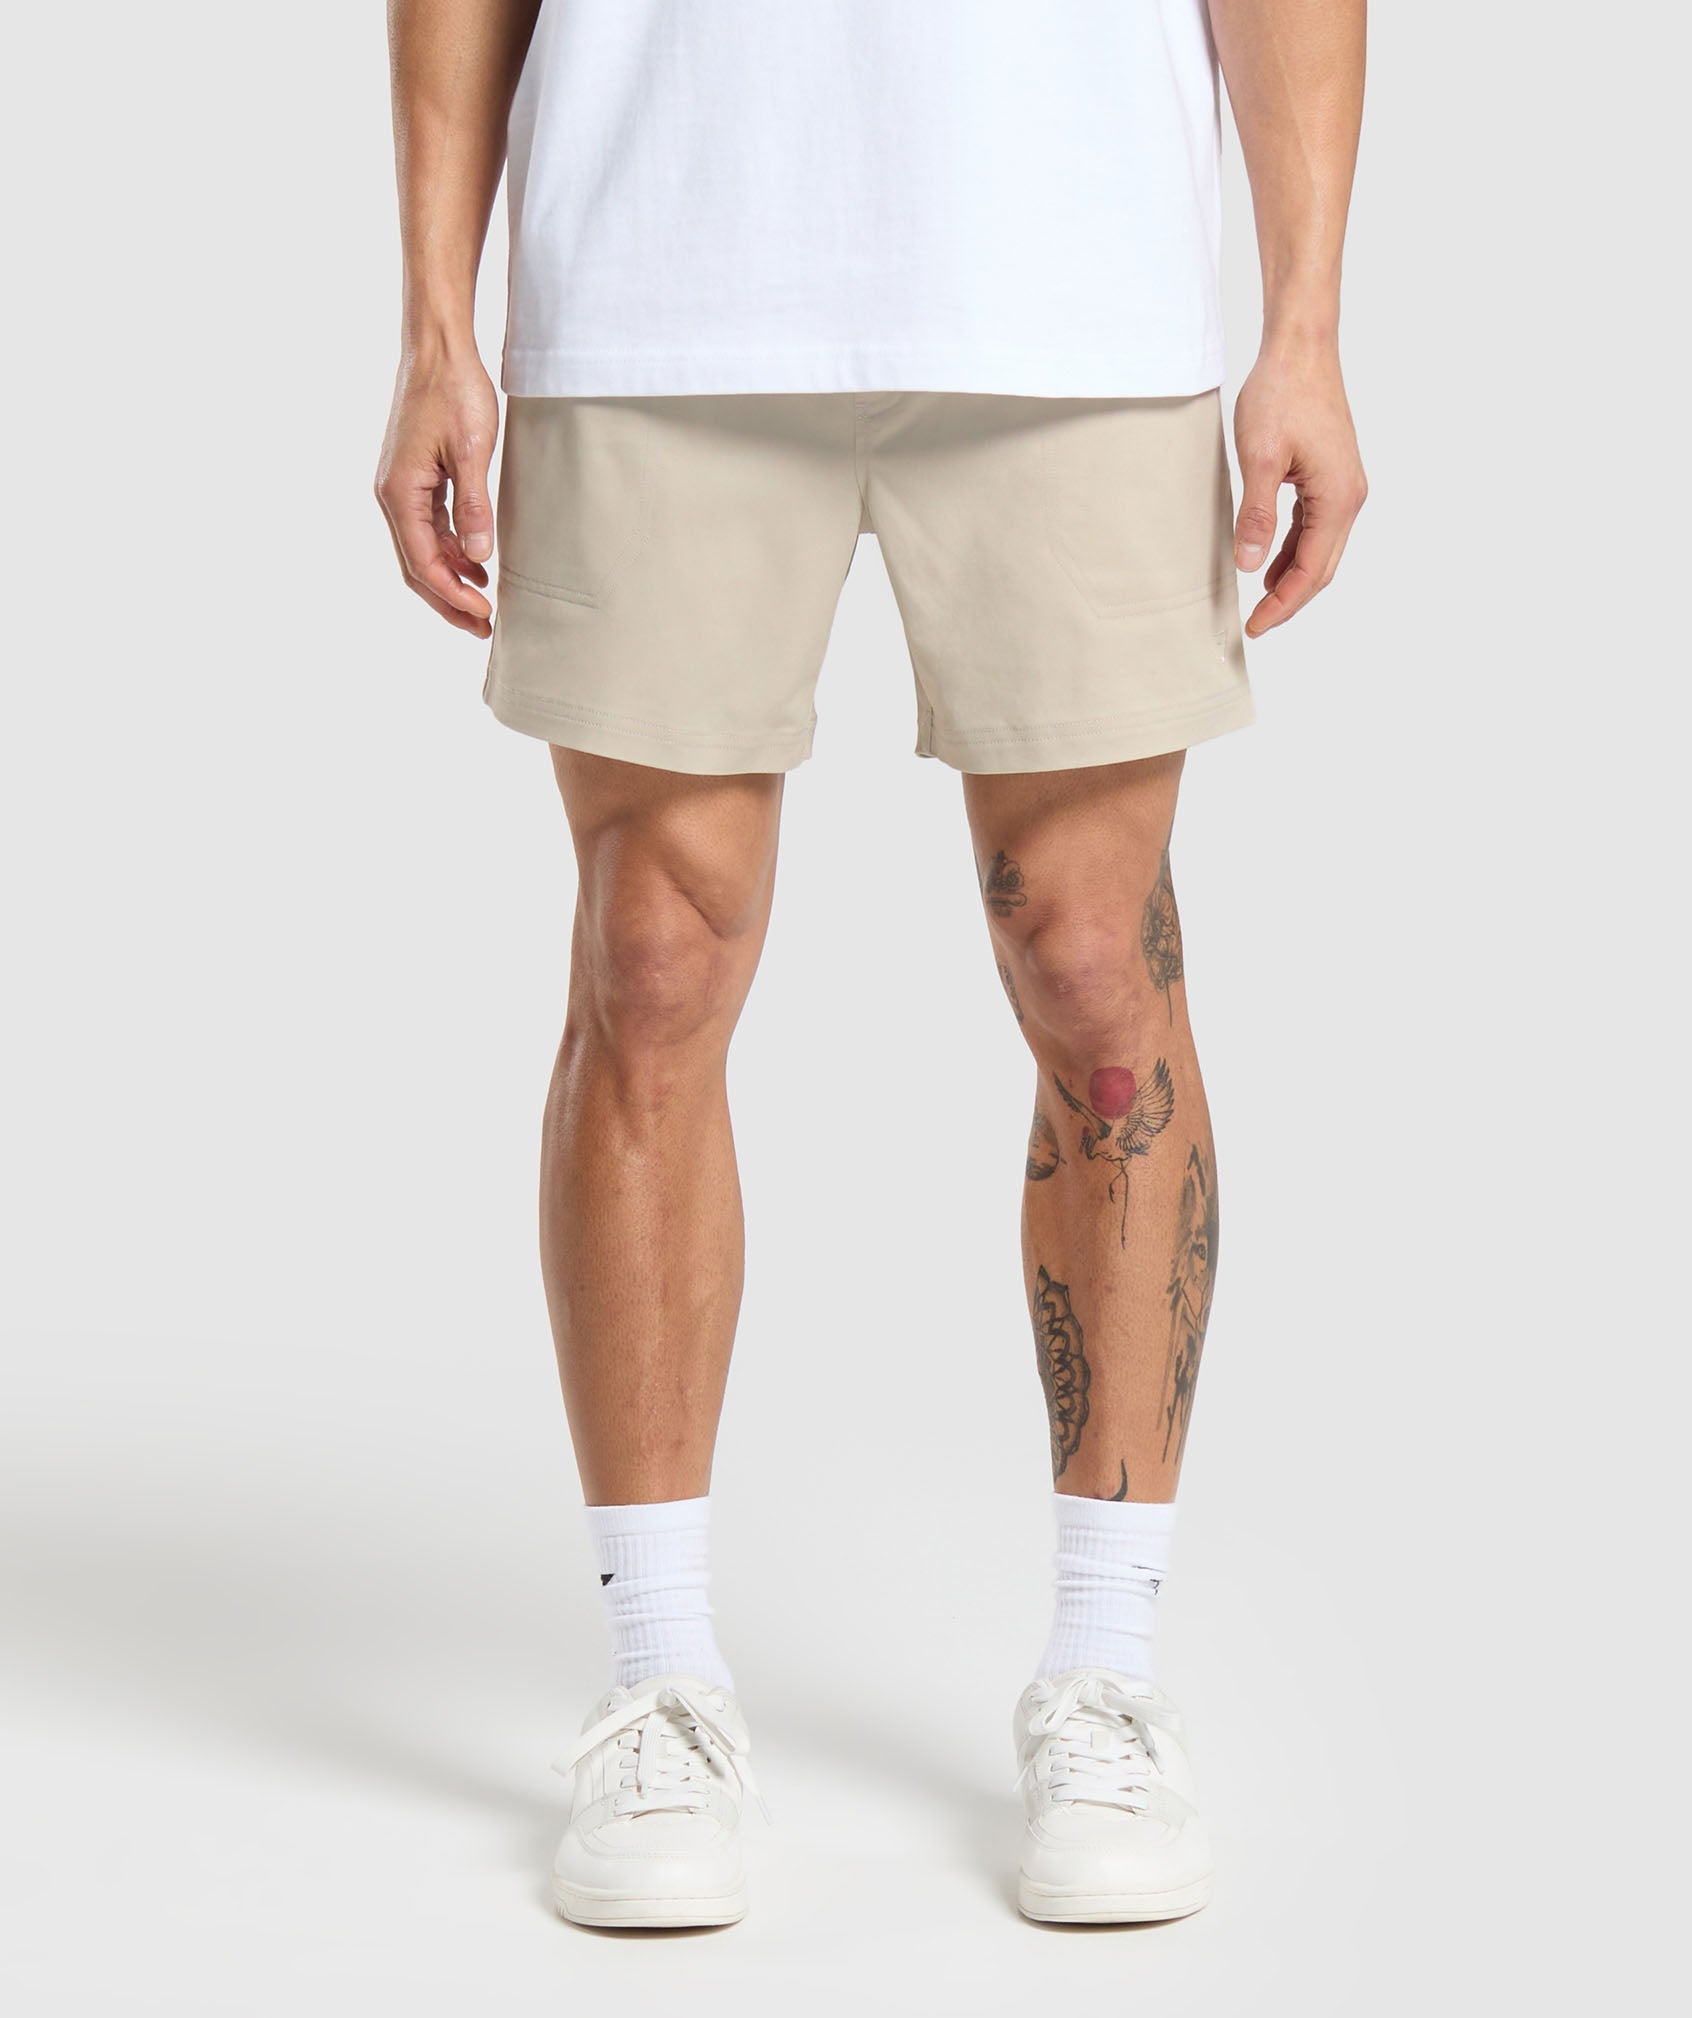 Rest Day Woven Shorts in Pebble Grey